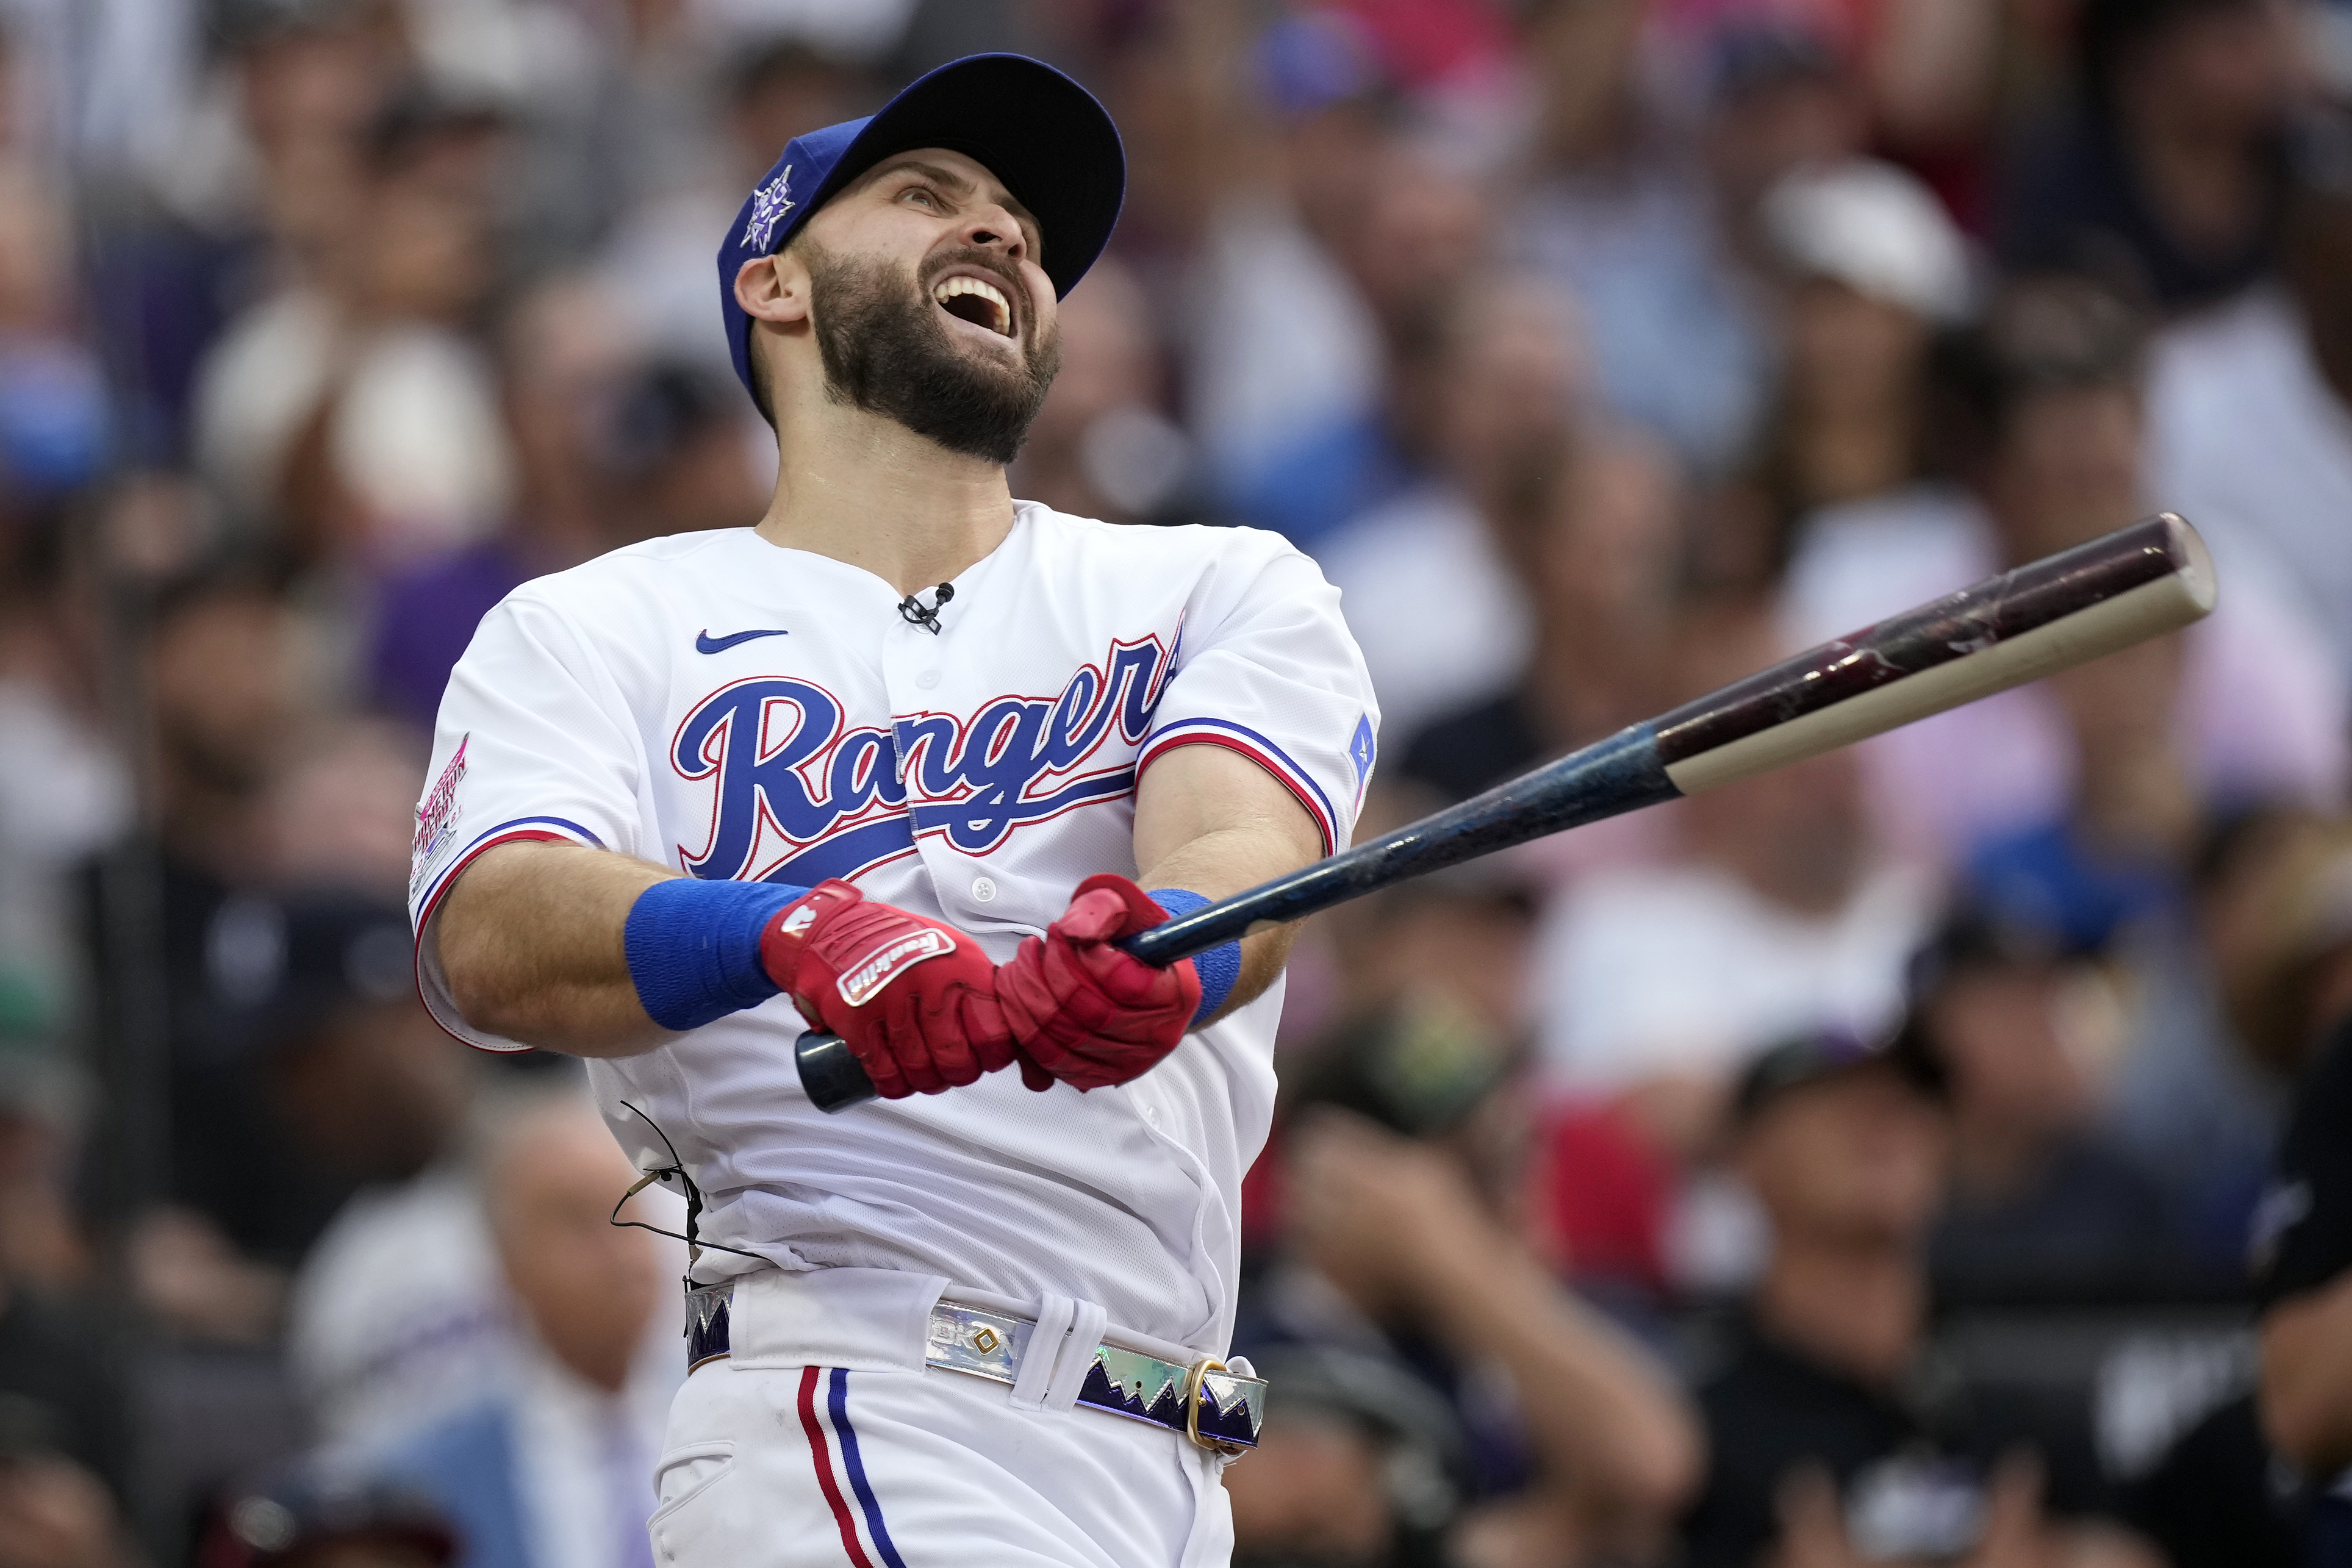 Report: Padres remain interested in trading for Rangers' Gallo